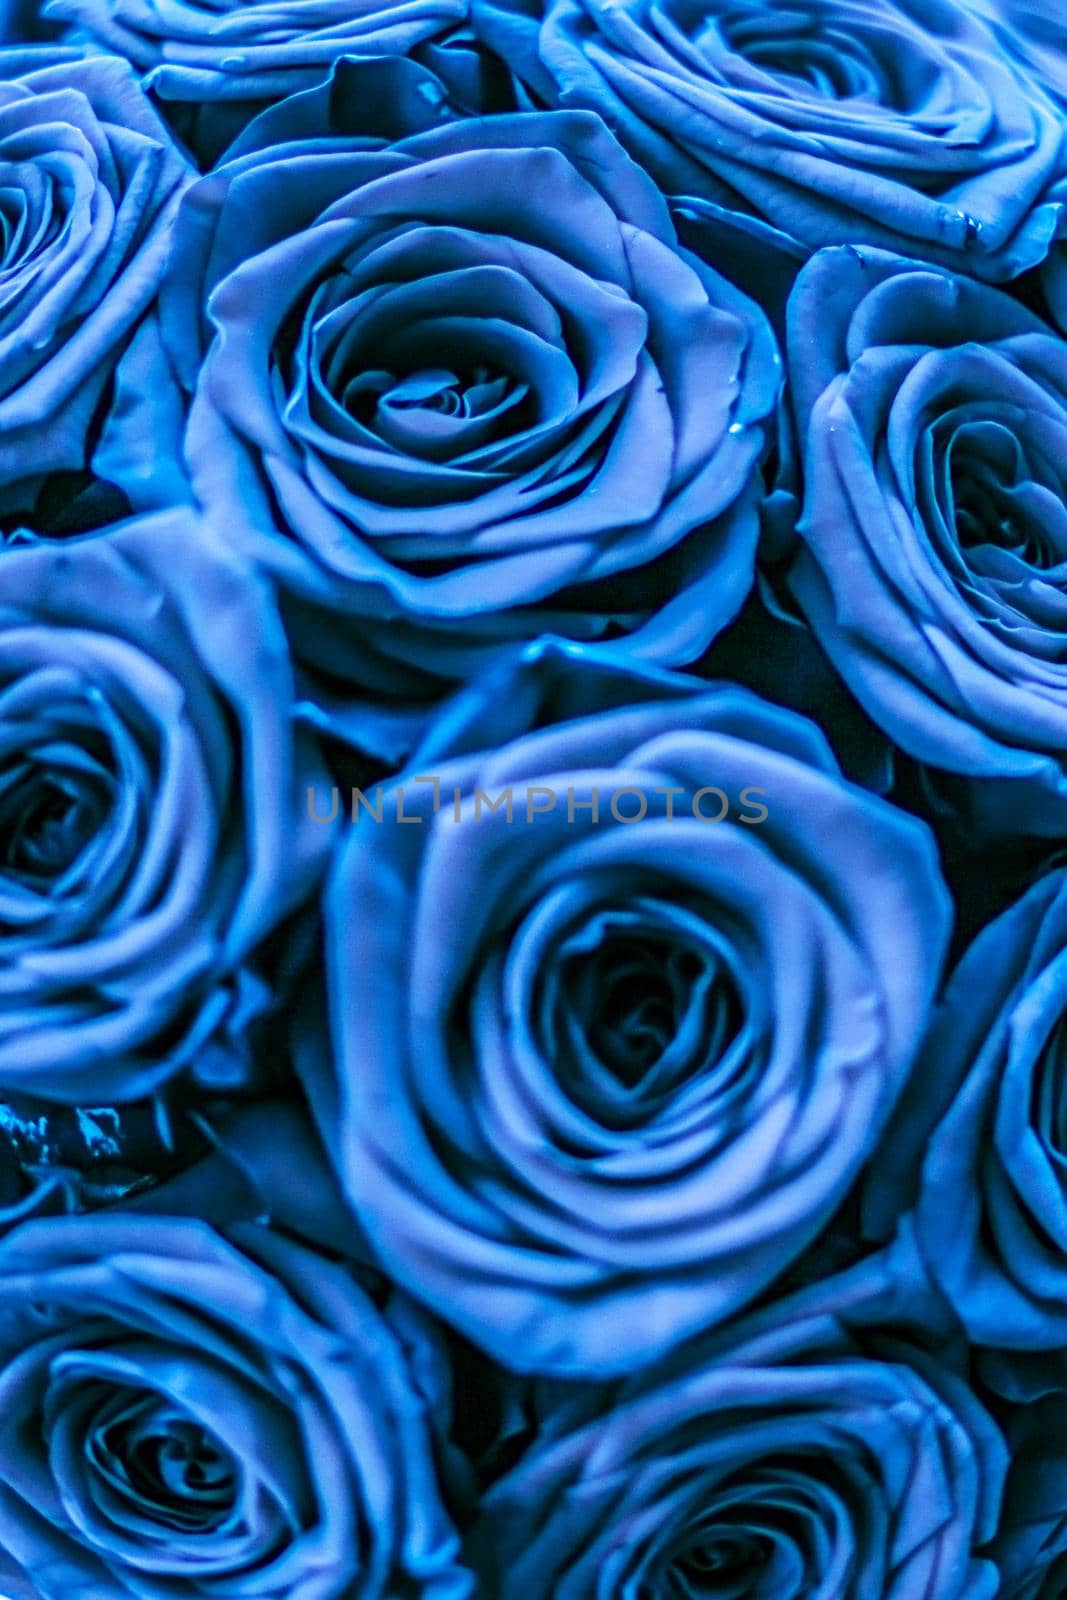 Blooming rose, flower blossom and Valentines Day gift concept - Glamour luxury bouquet of blue roses, flowers in bloom as floral holiday background